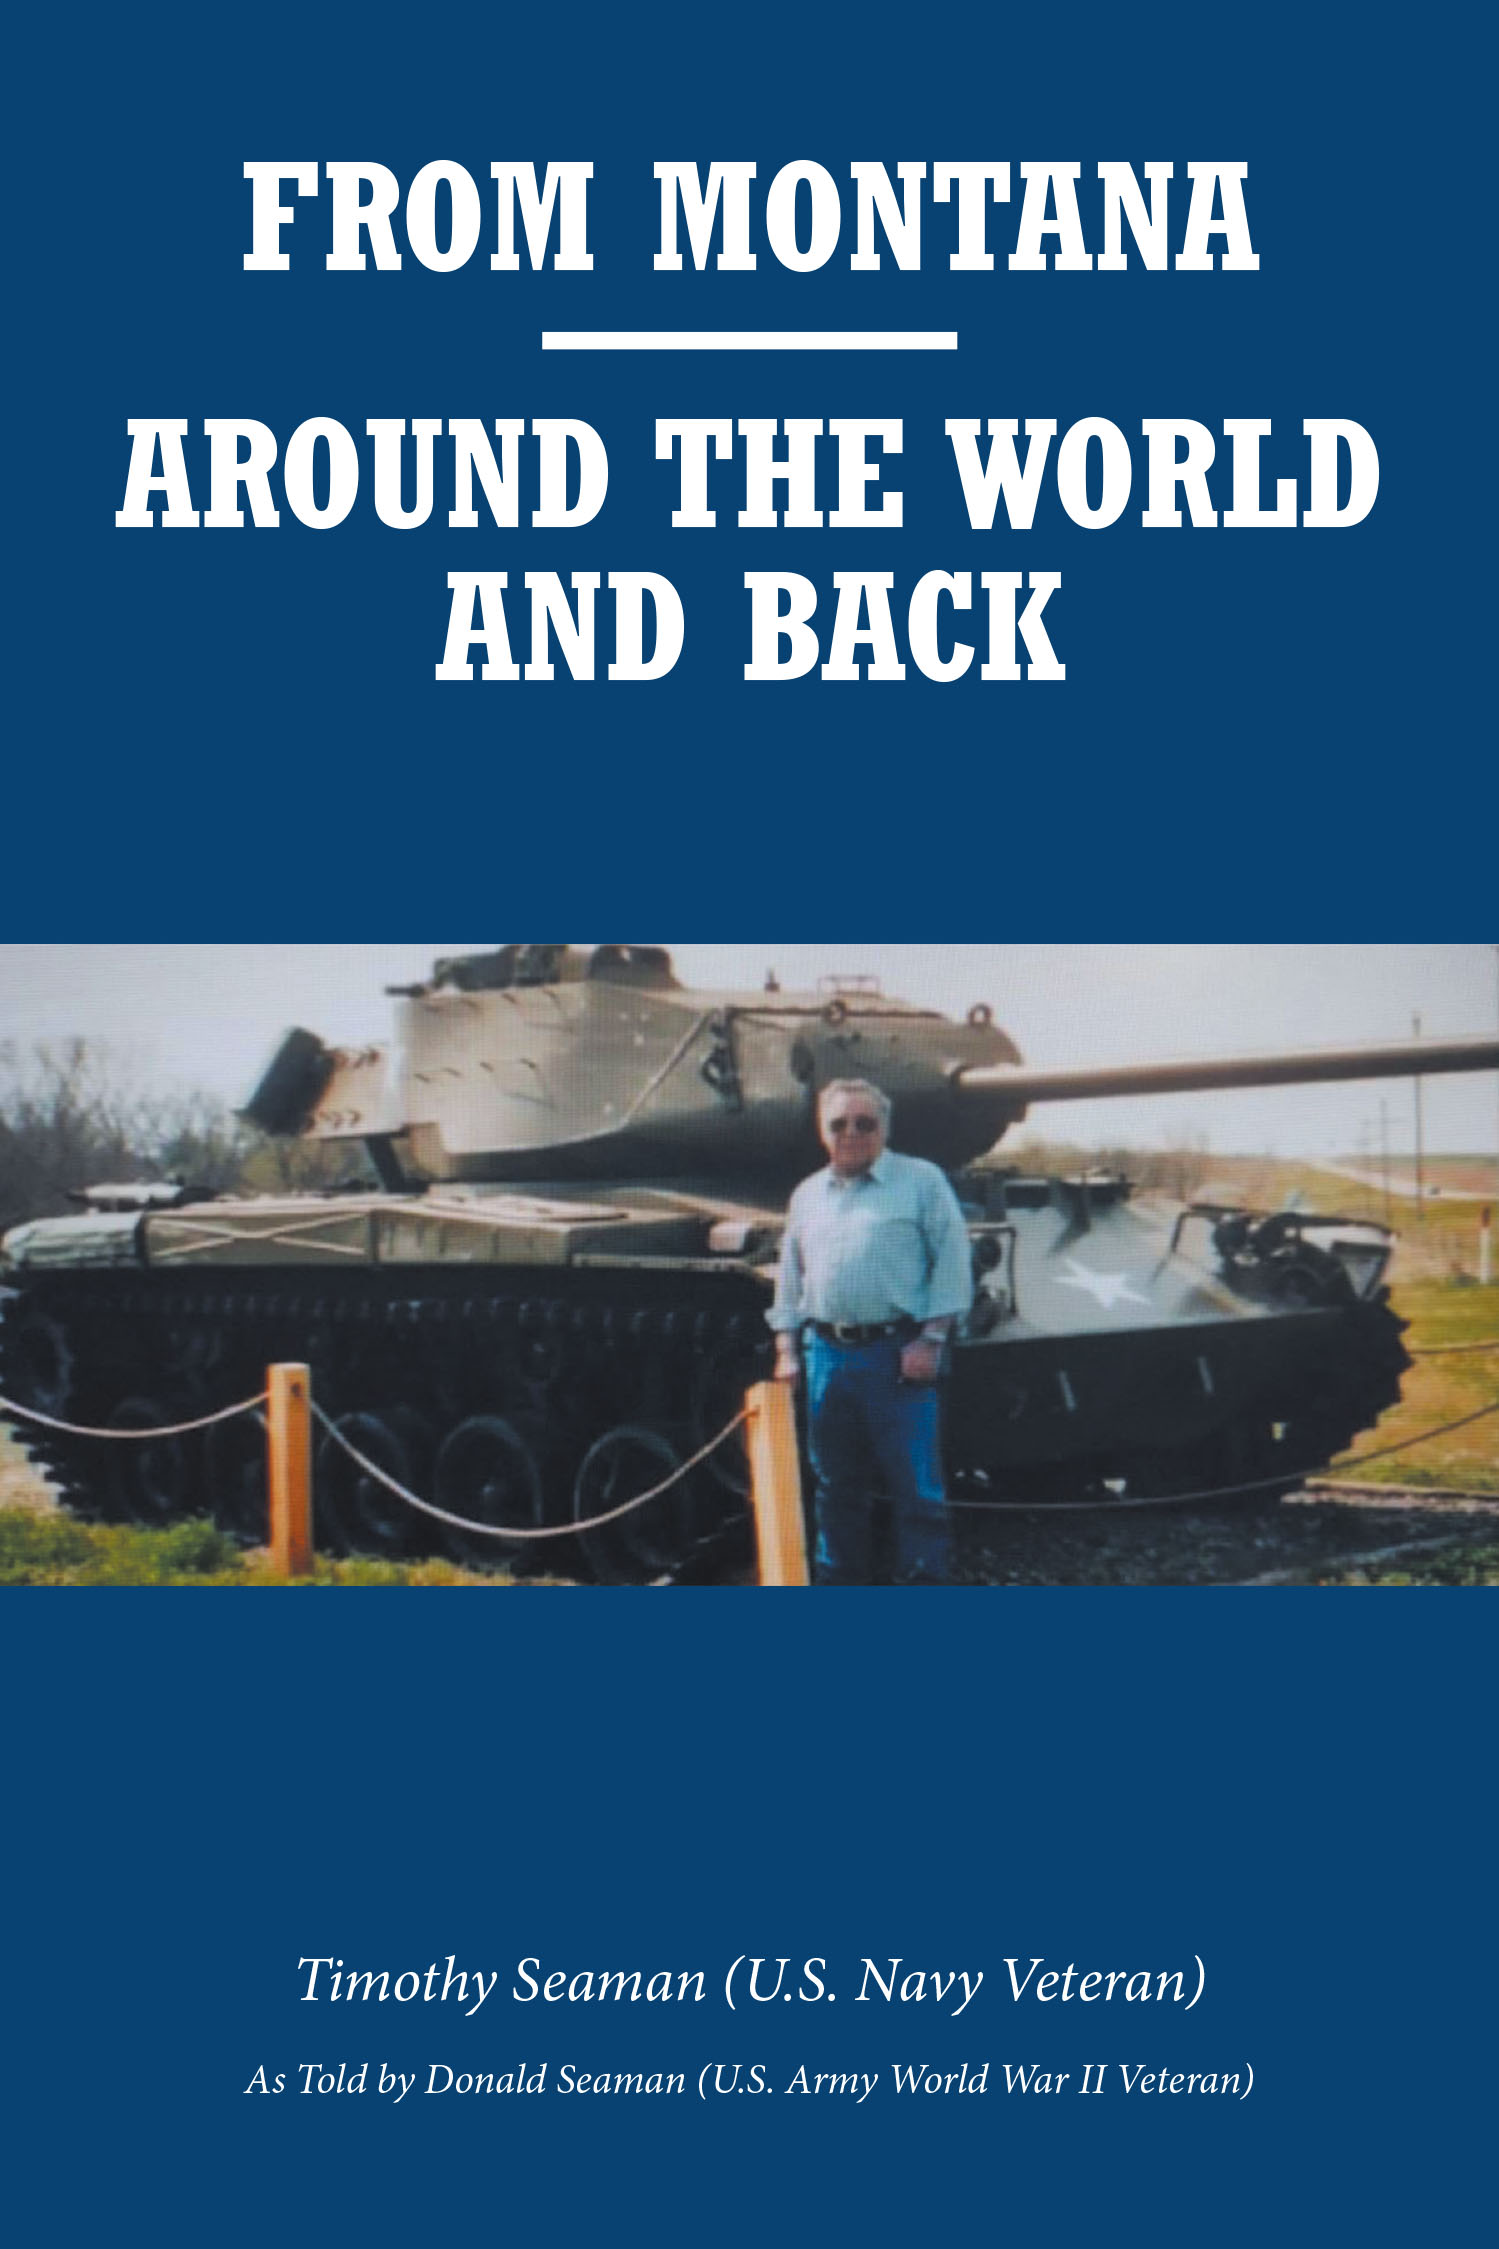 Timothy Seaman’s New Book, “From Montana-Around the World and Back,” is a Riveting Account That Chronicles the Extraordinary Life of the Author’s Father